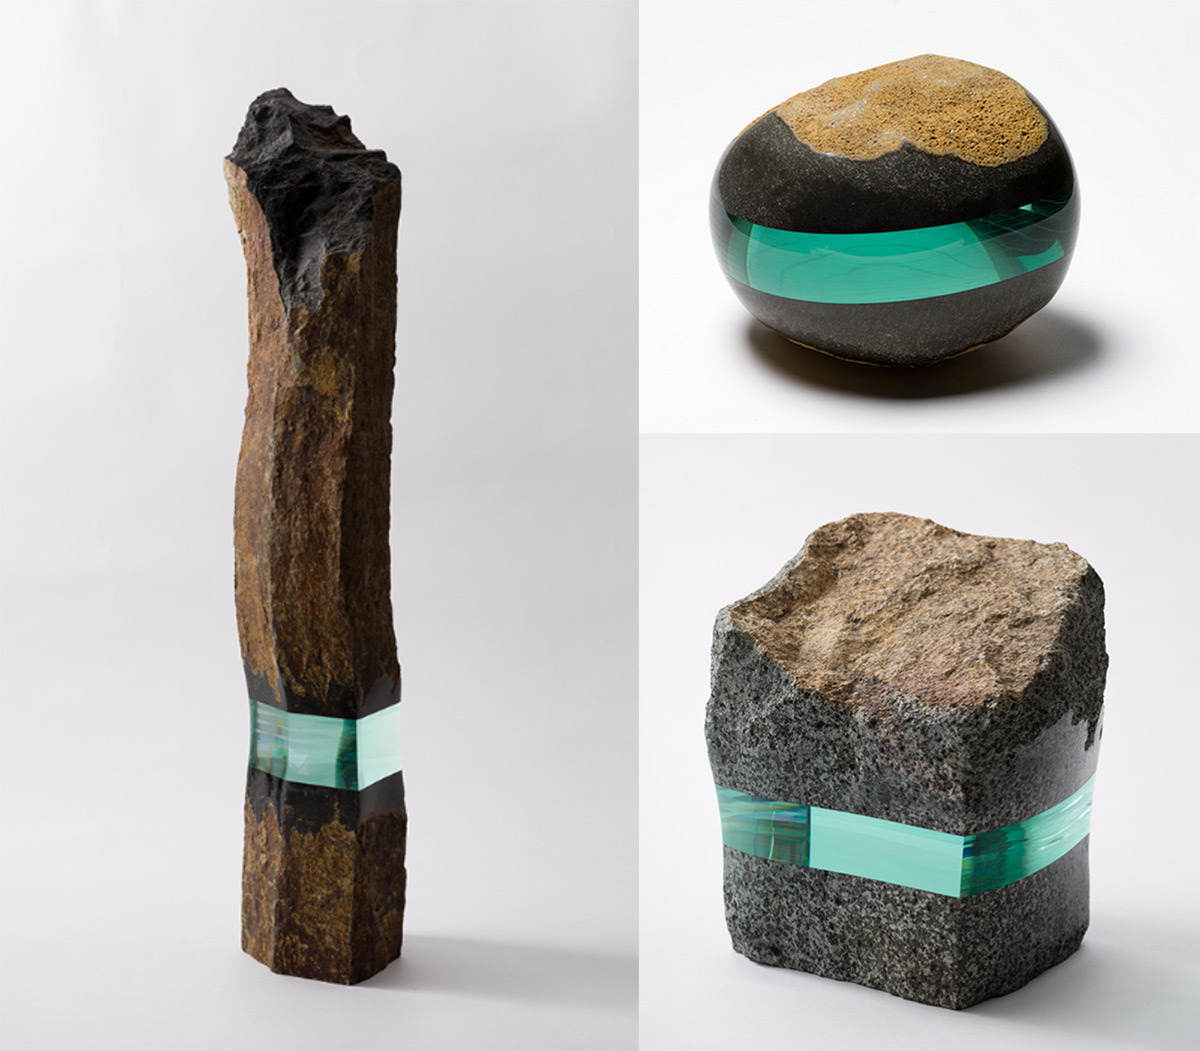 mysticplaces:  itscolossal:  Books and Stones Embedded with Sleek Layers of Laminate